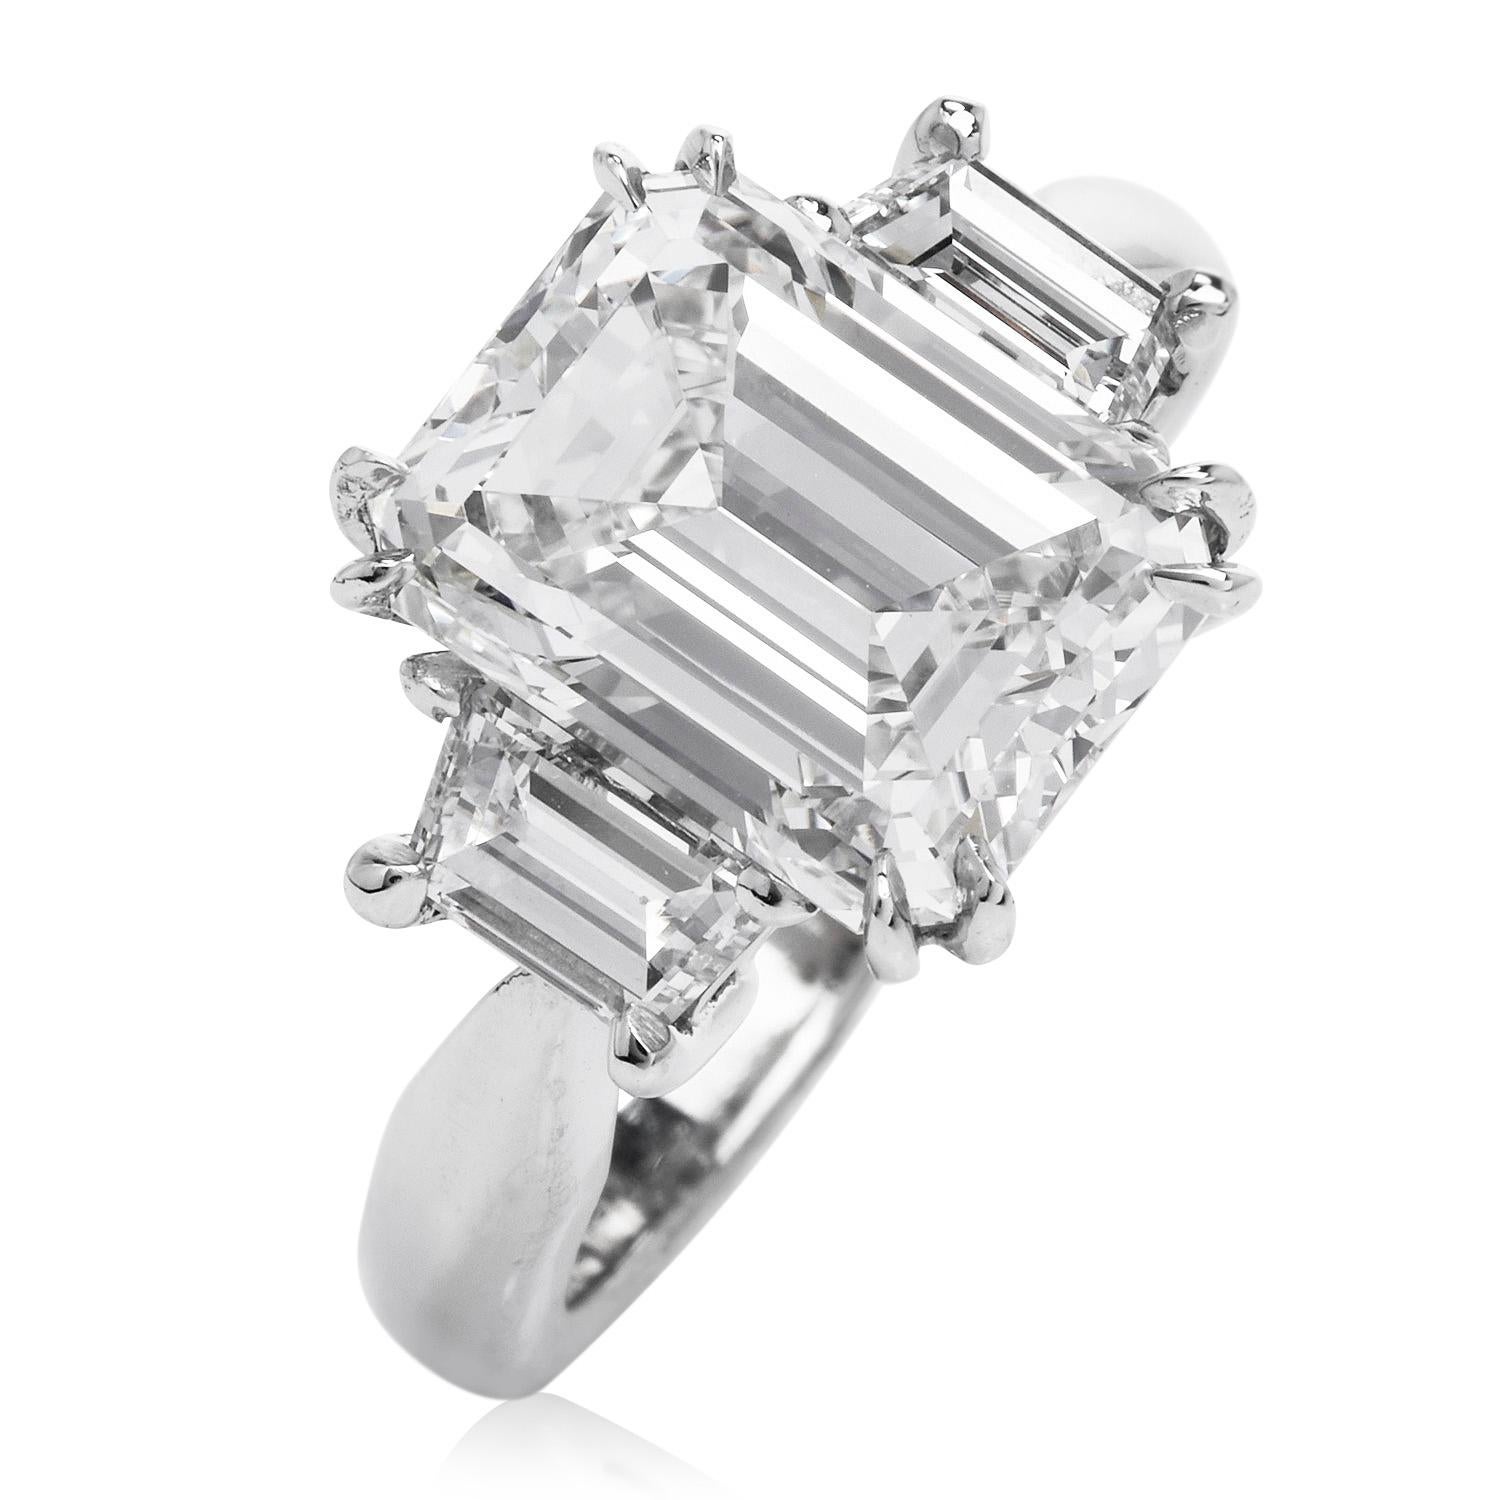 This Breathtaking Emerald-cut diamond ring is crafted in solid platinum.

It is centered by a high-quality Emerald-cut Genuine Diamond, Prong Set, icy 4.09 carat, GIA Graded I color, VS1 Clarity.

This stunning diamond is flanked by two